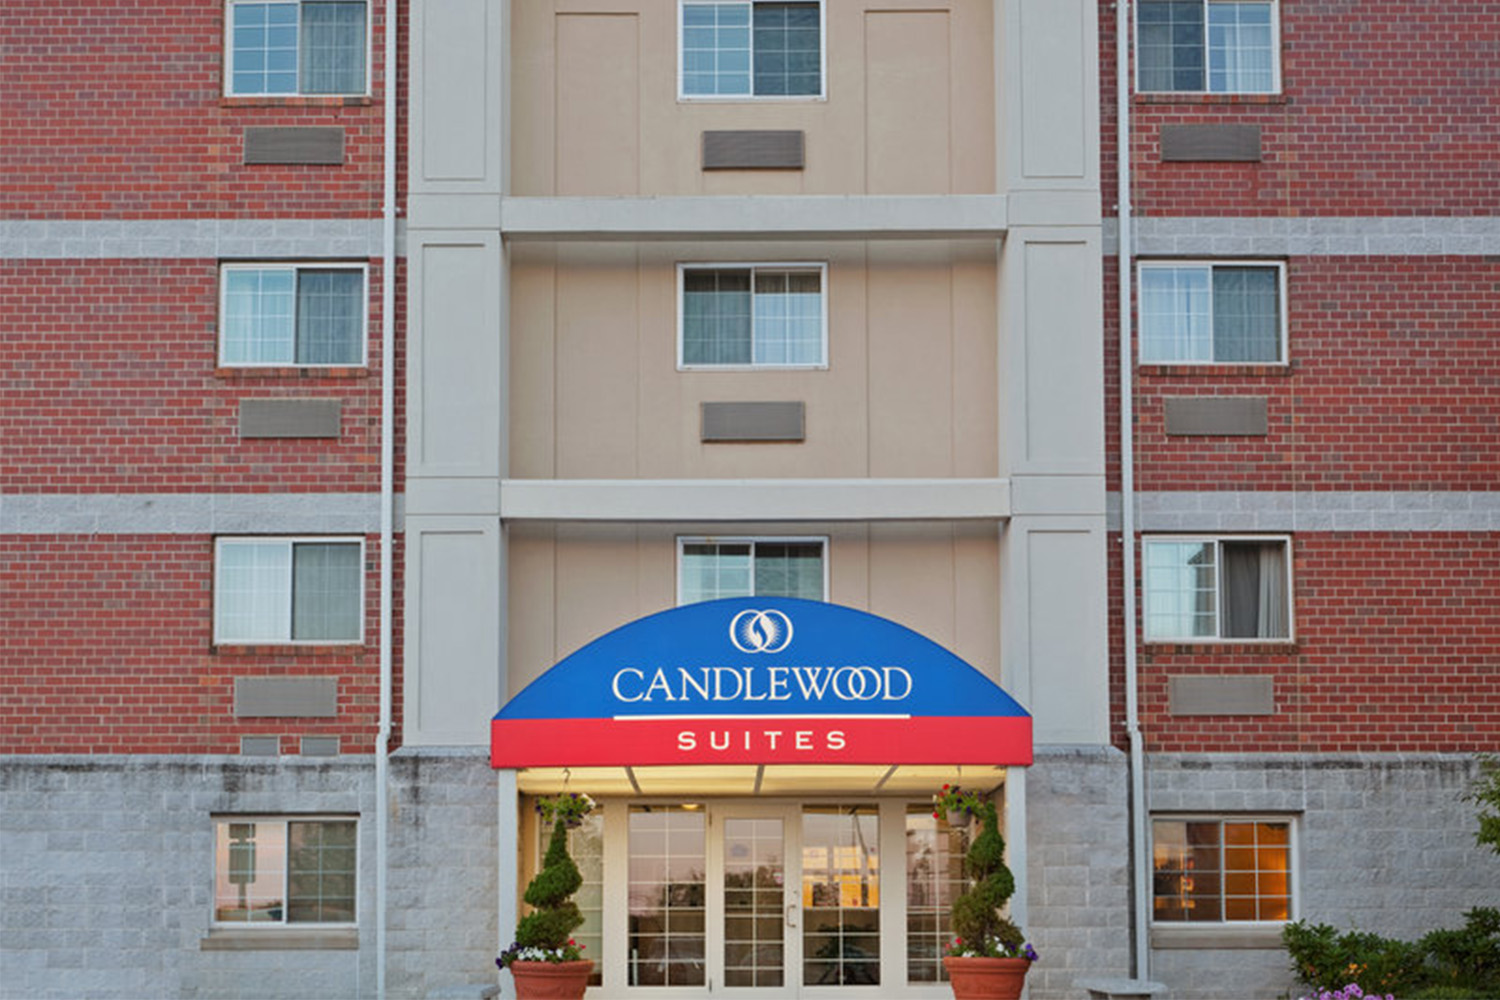 main entrance into Candlewood Suites with blue tent over entrance